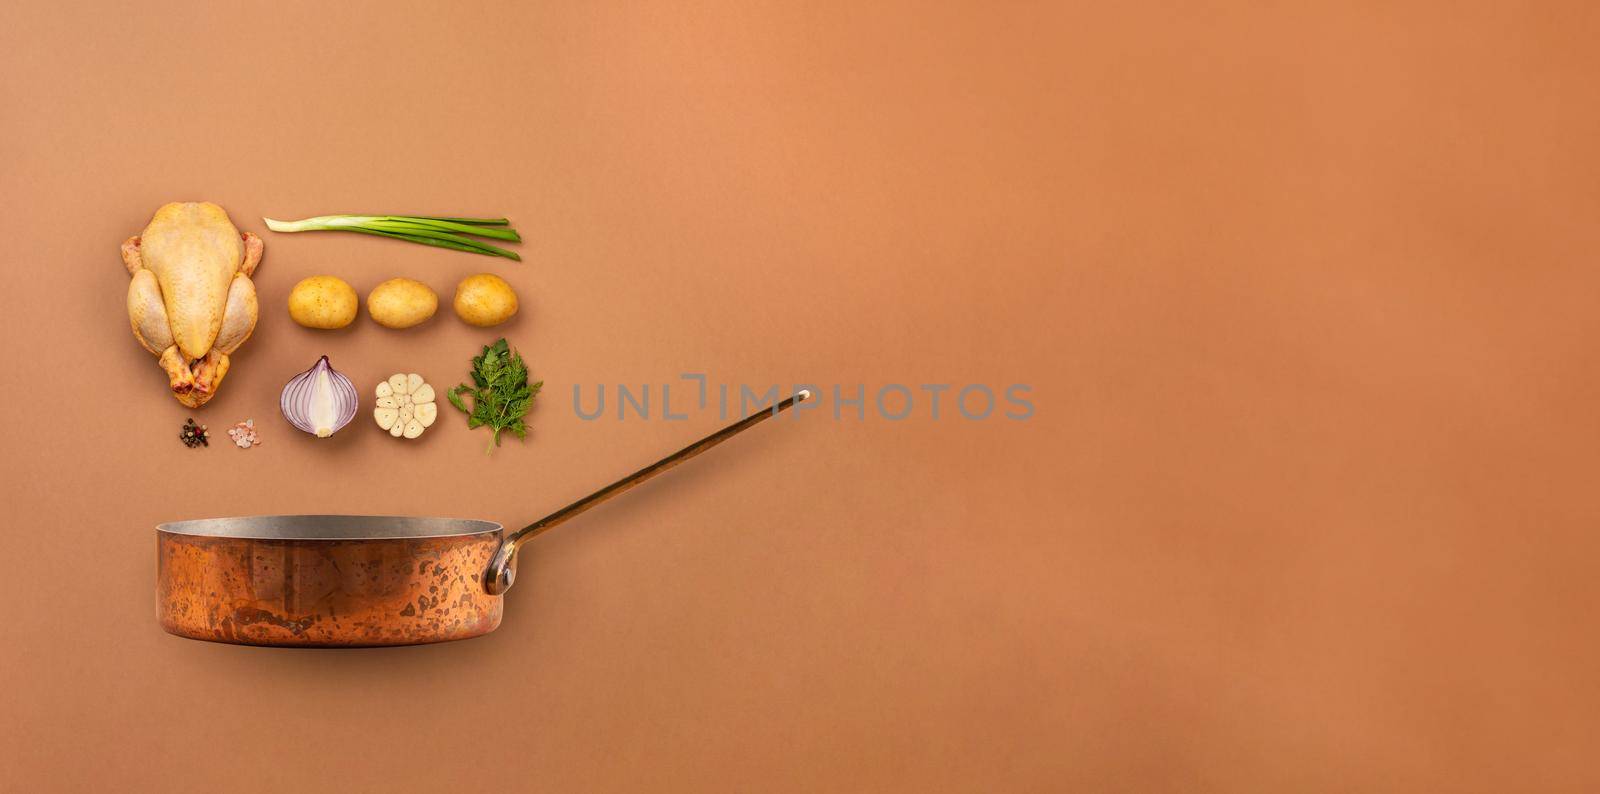 Set of raw ingredients arranged for cooking chicken soup or stew in copper pot: chicken, potatoes, vegetables on brown background from above. Healthy meal with poultry for dinner, space for text